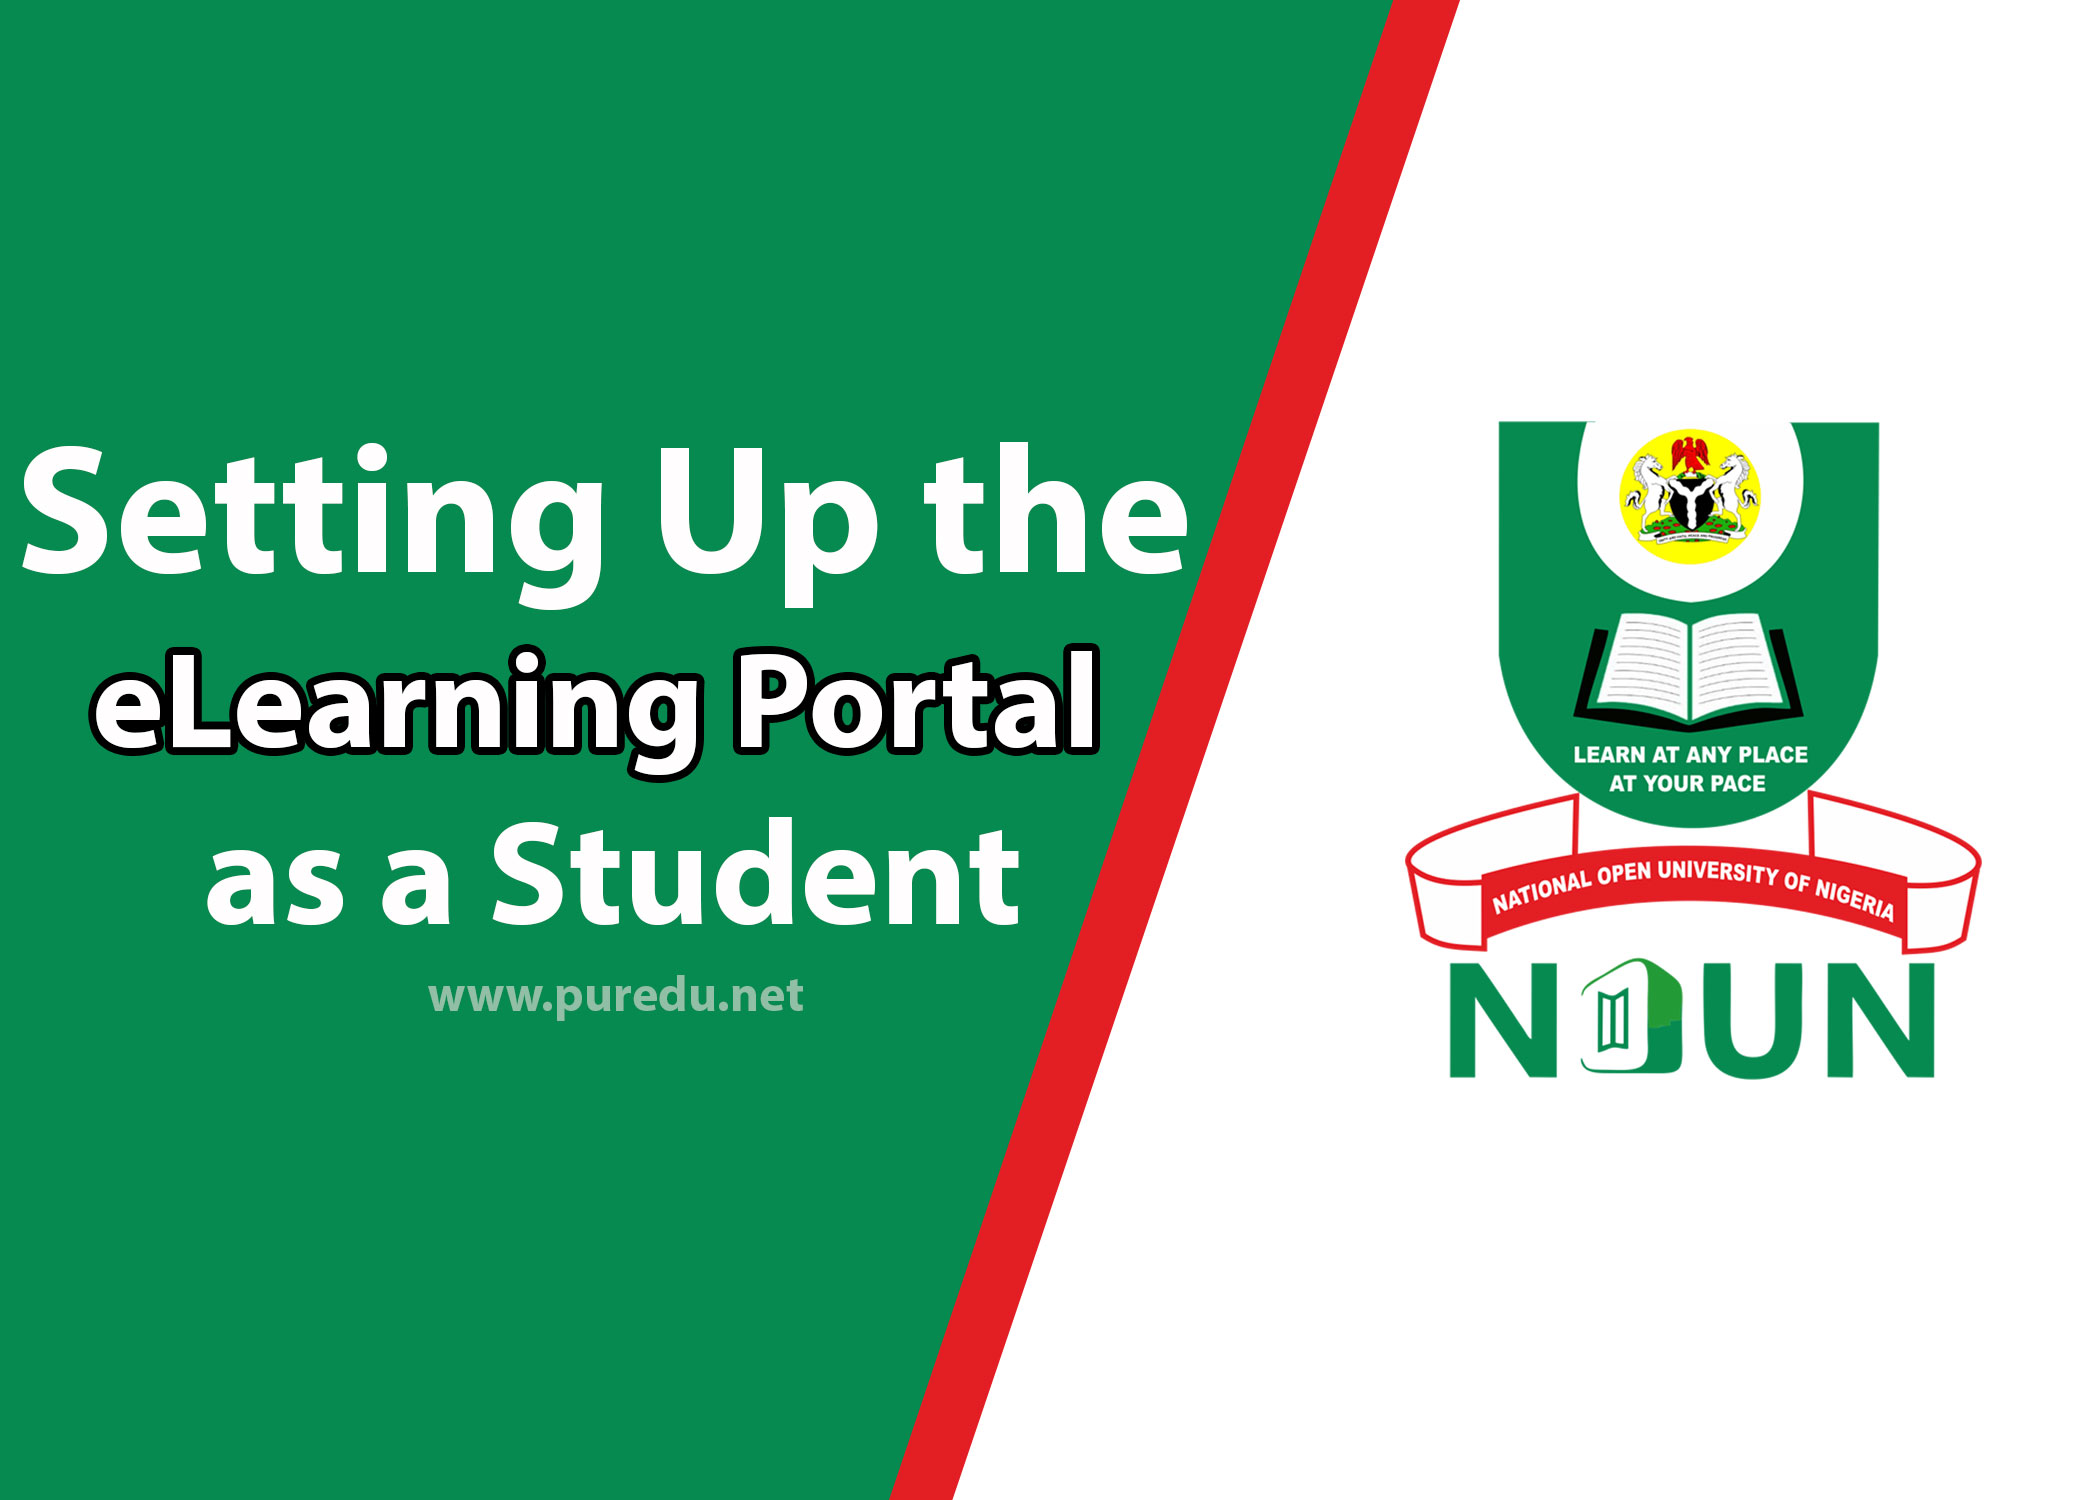 Setting up the eLearning Portal as a Student